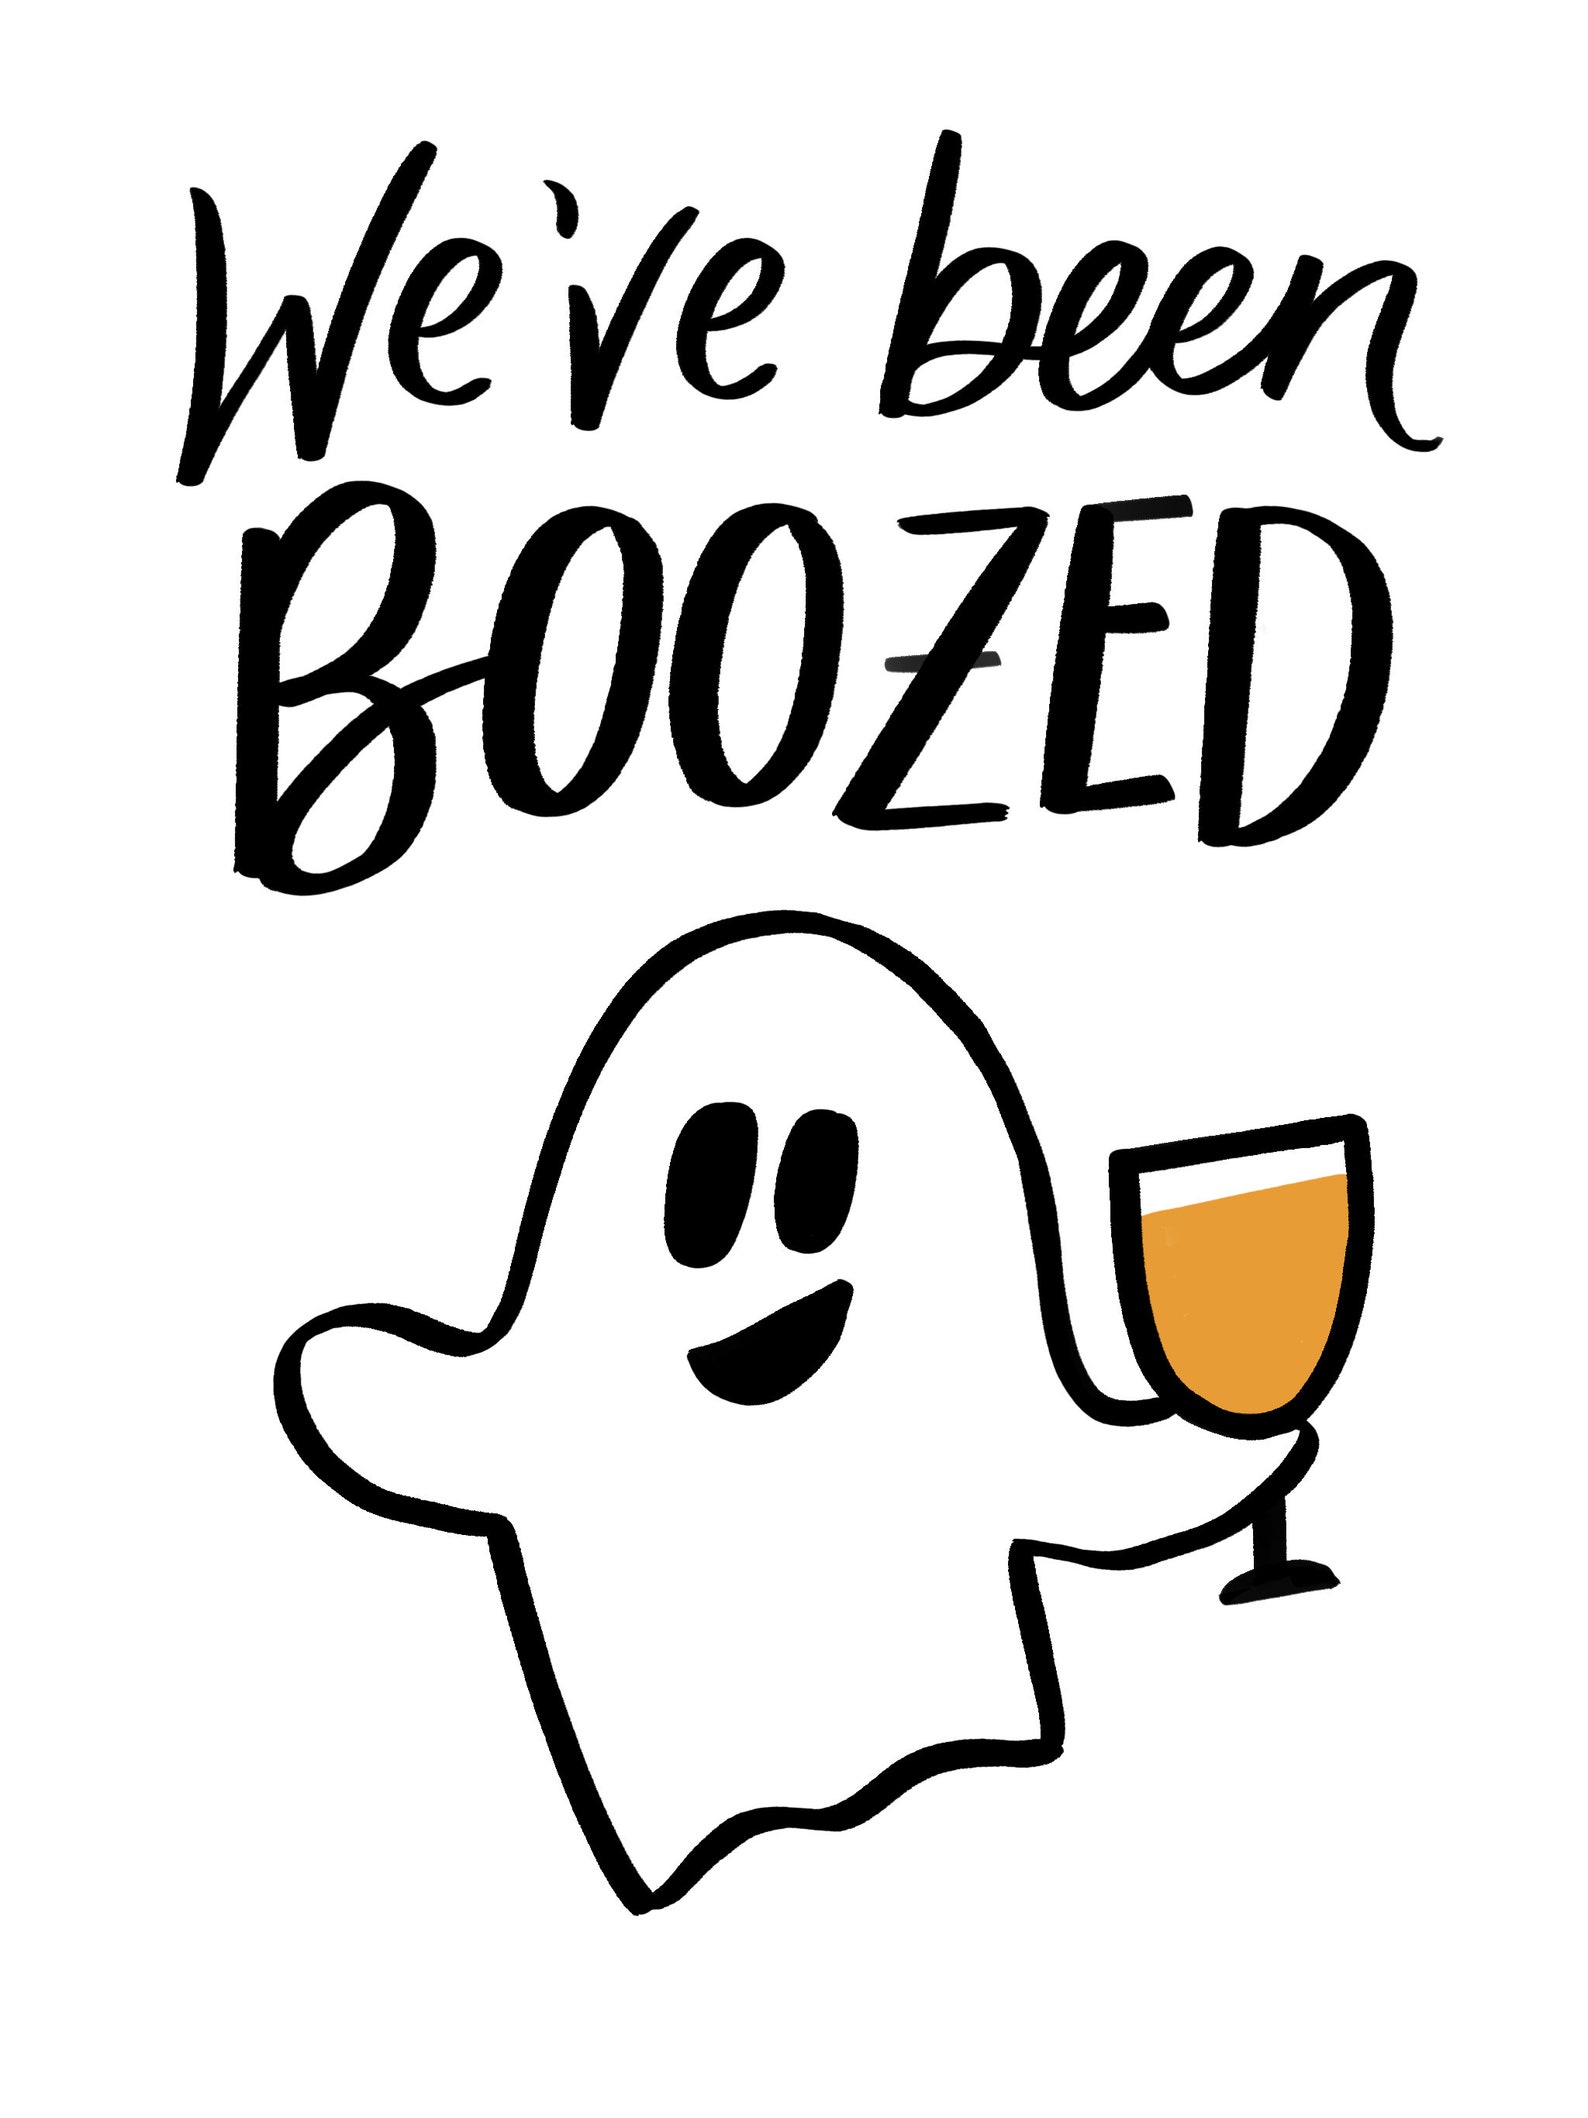 You've Been Boozed We've Been Boozed Printable - Etsy